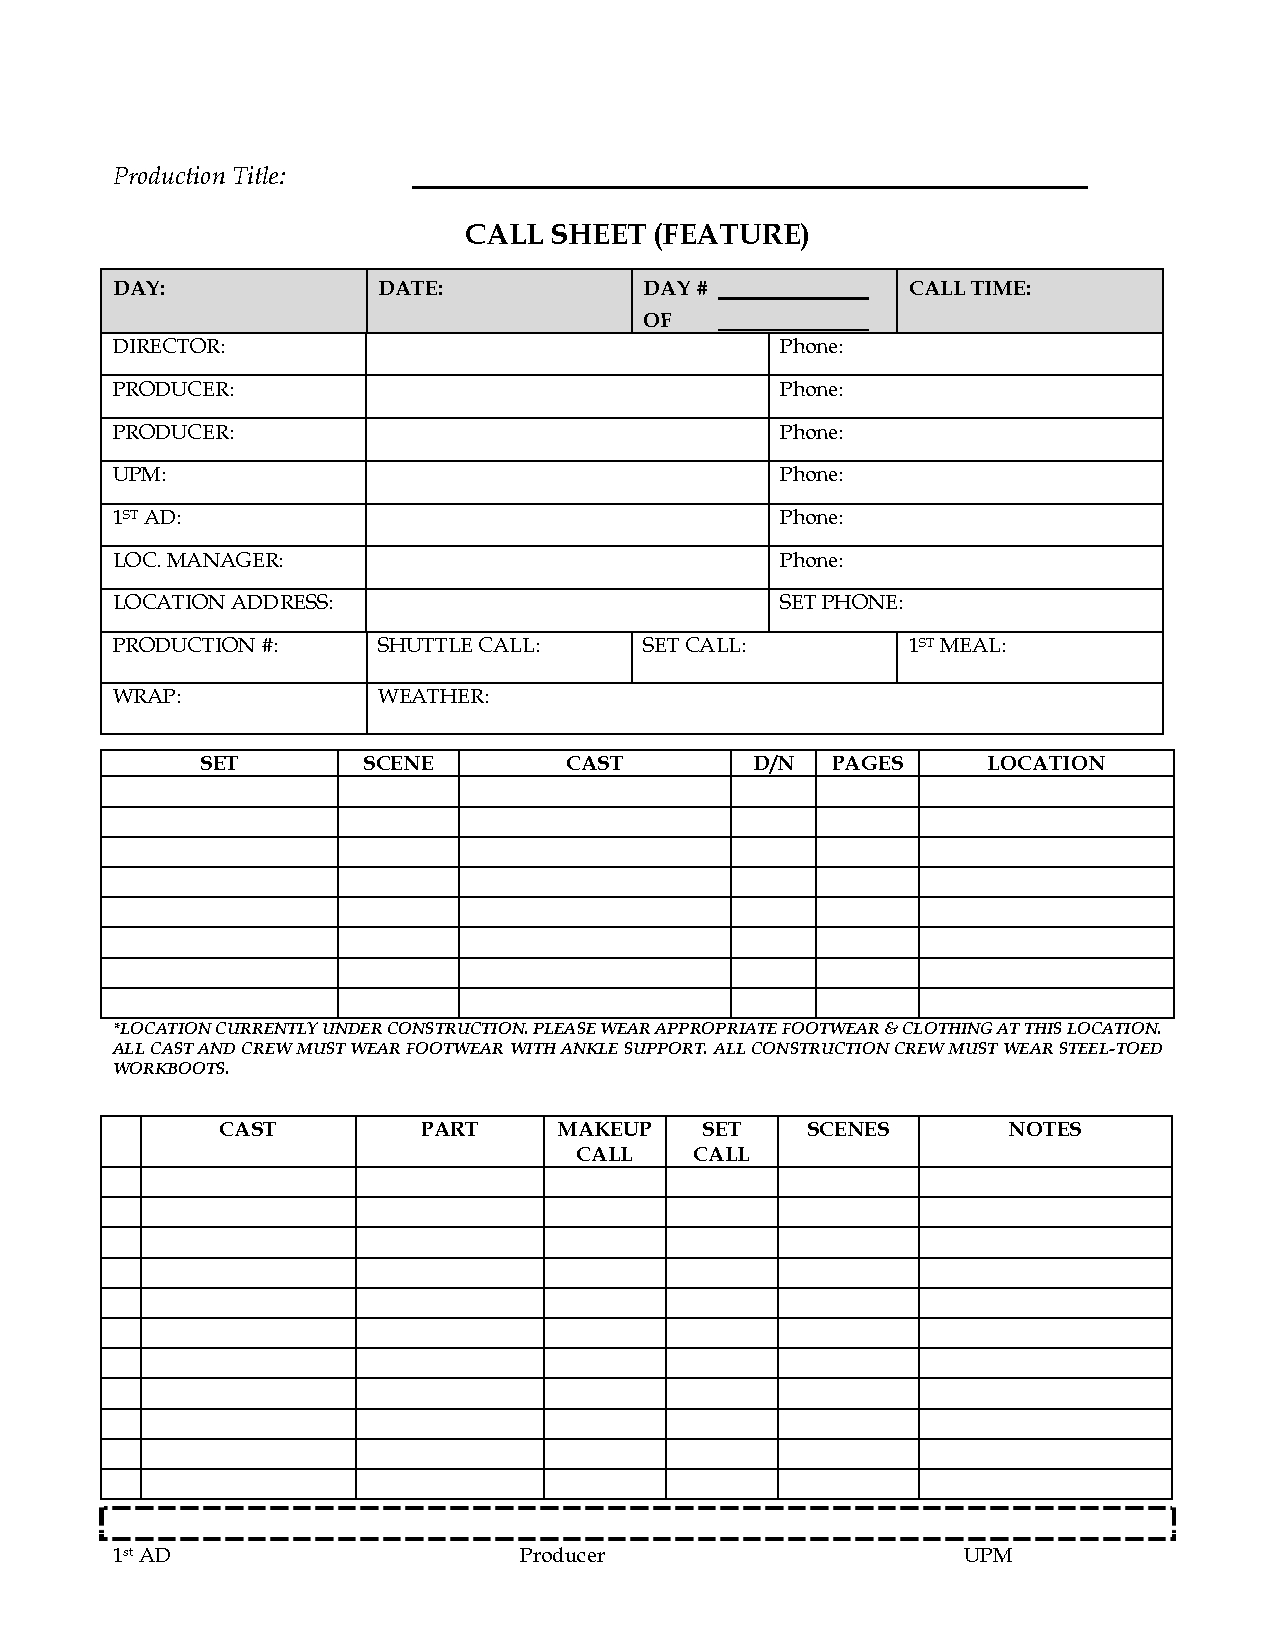 Awesome Call Sheet (Feature) Template Sample For Film Regarding Blank Call Sheet Template